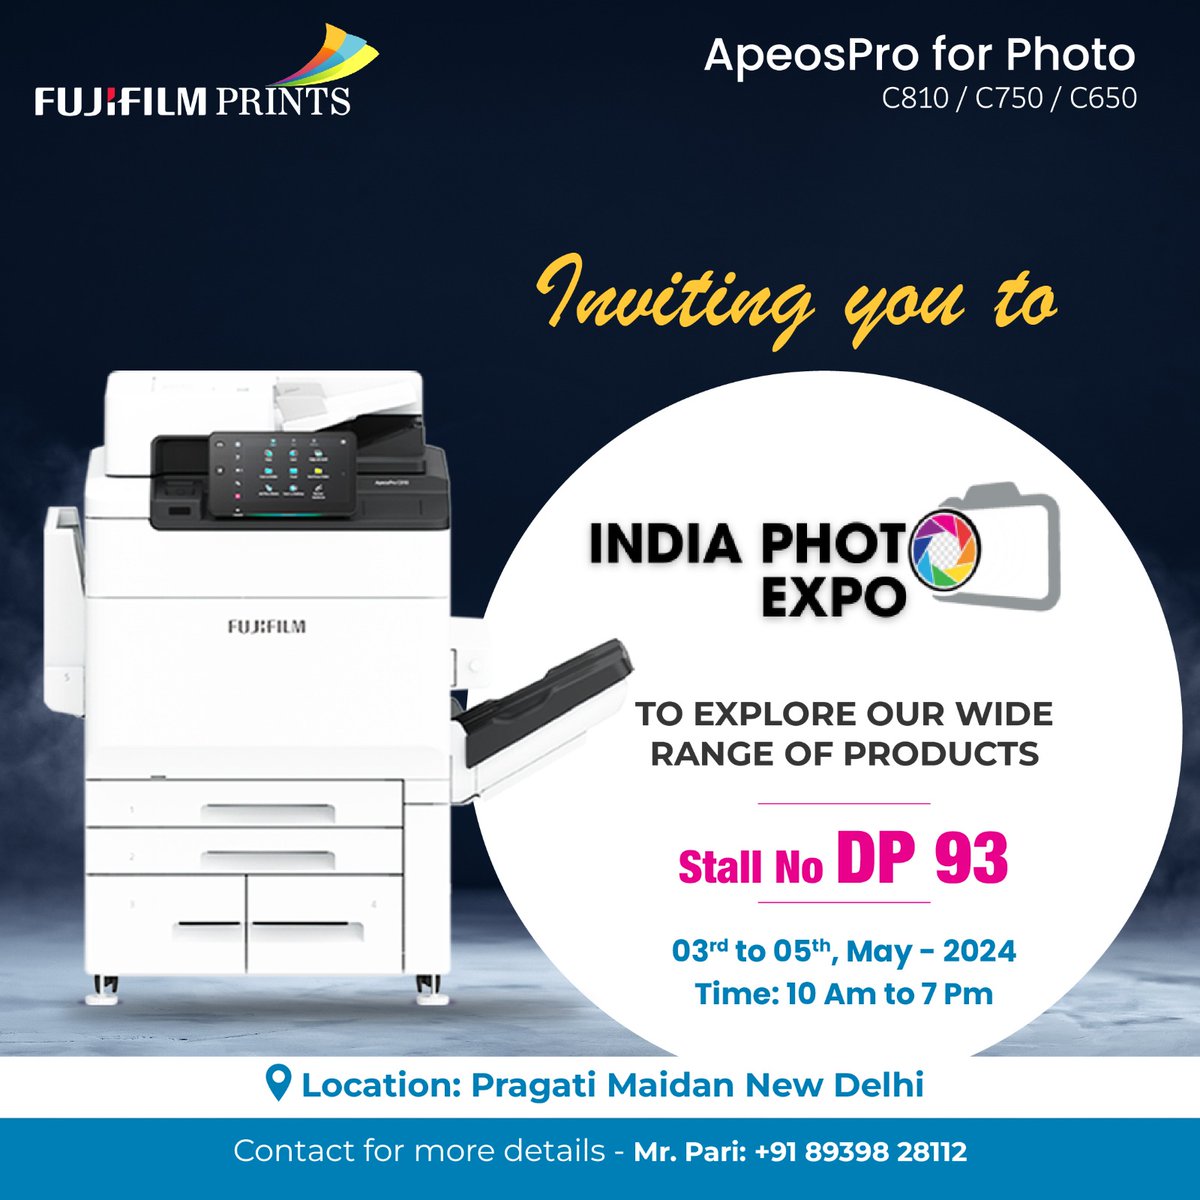 Inviting You To India Photo Expo To Explore Our Wide Range Of Products.

Apeos For Photo
C810 / C750 / C650

#fujifilm #fujifilmprints #photofinishing #photoproducts #qualityprinting #fujifilmpaper #fujifilmsystems #photography #weddingphotos #bestsolution